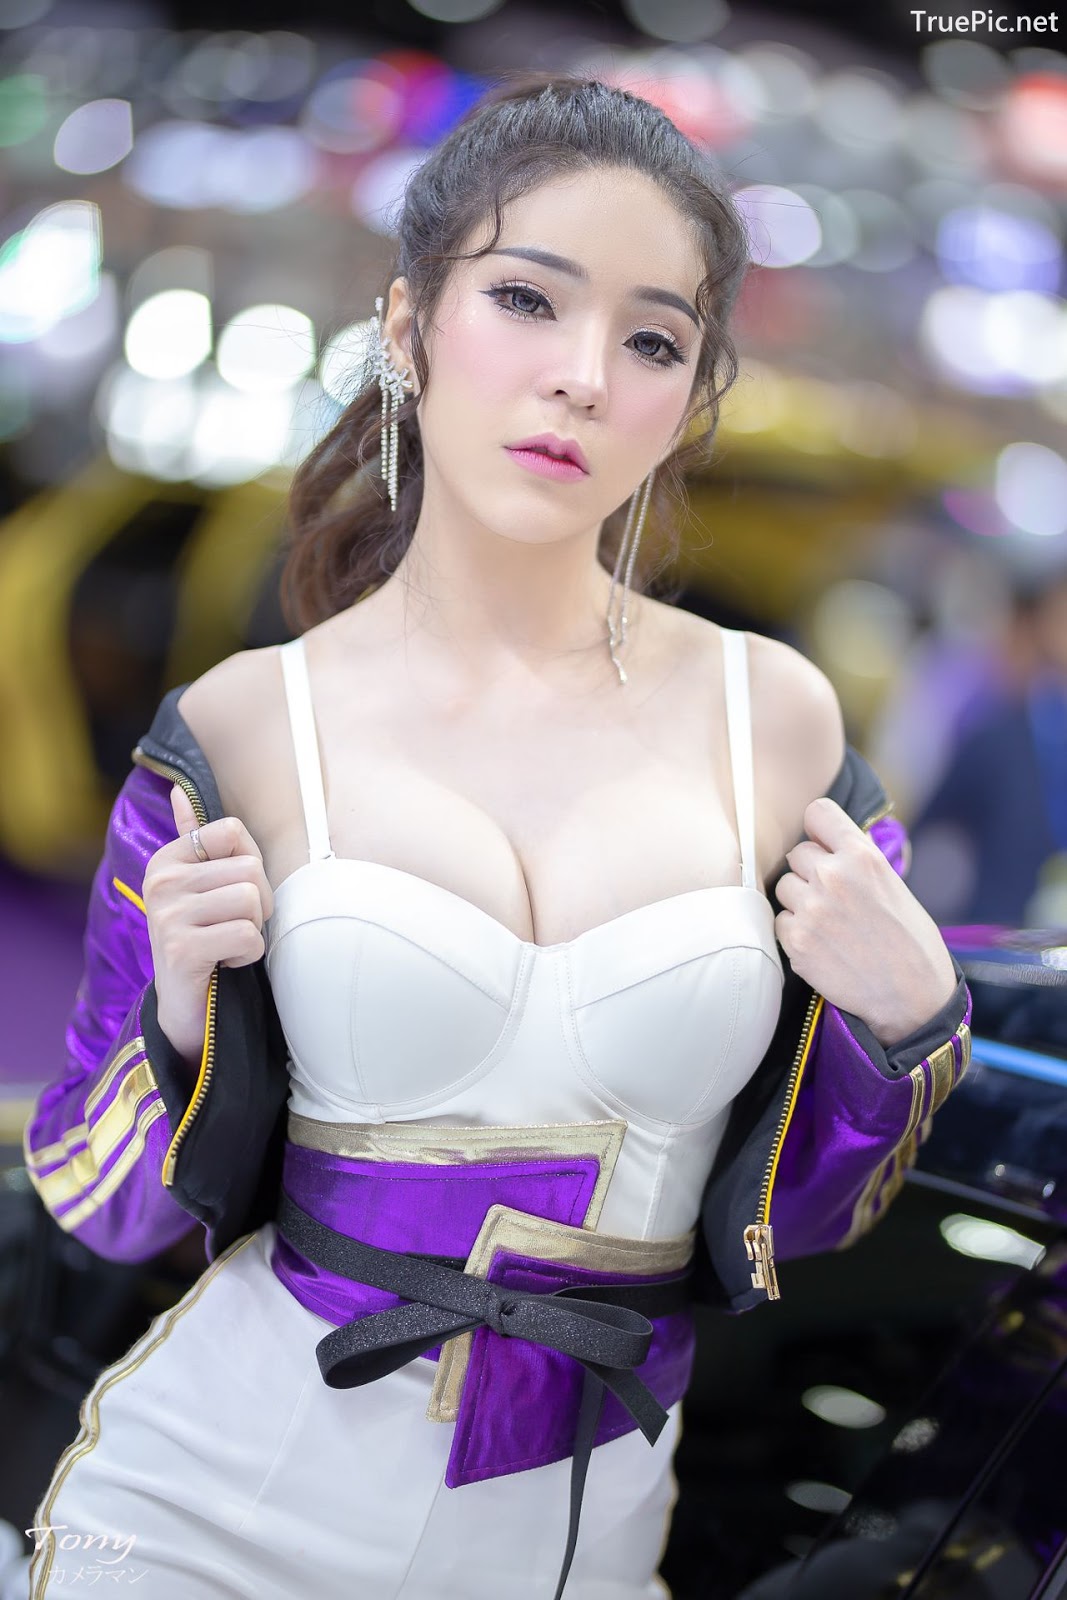 Image-Thailand-Hot-Model-Thai-Racing-Girl-At-Motor-Expo-2019-TruePic.net- Picture-97